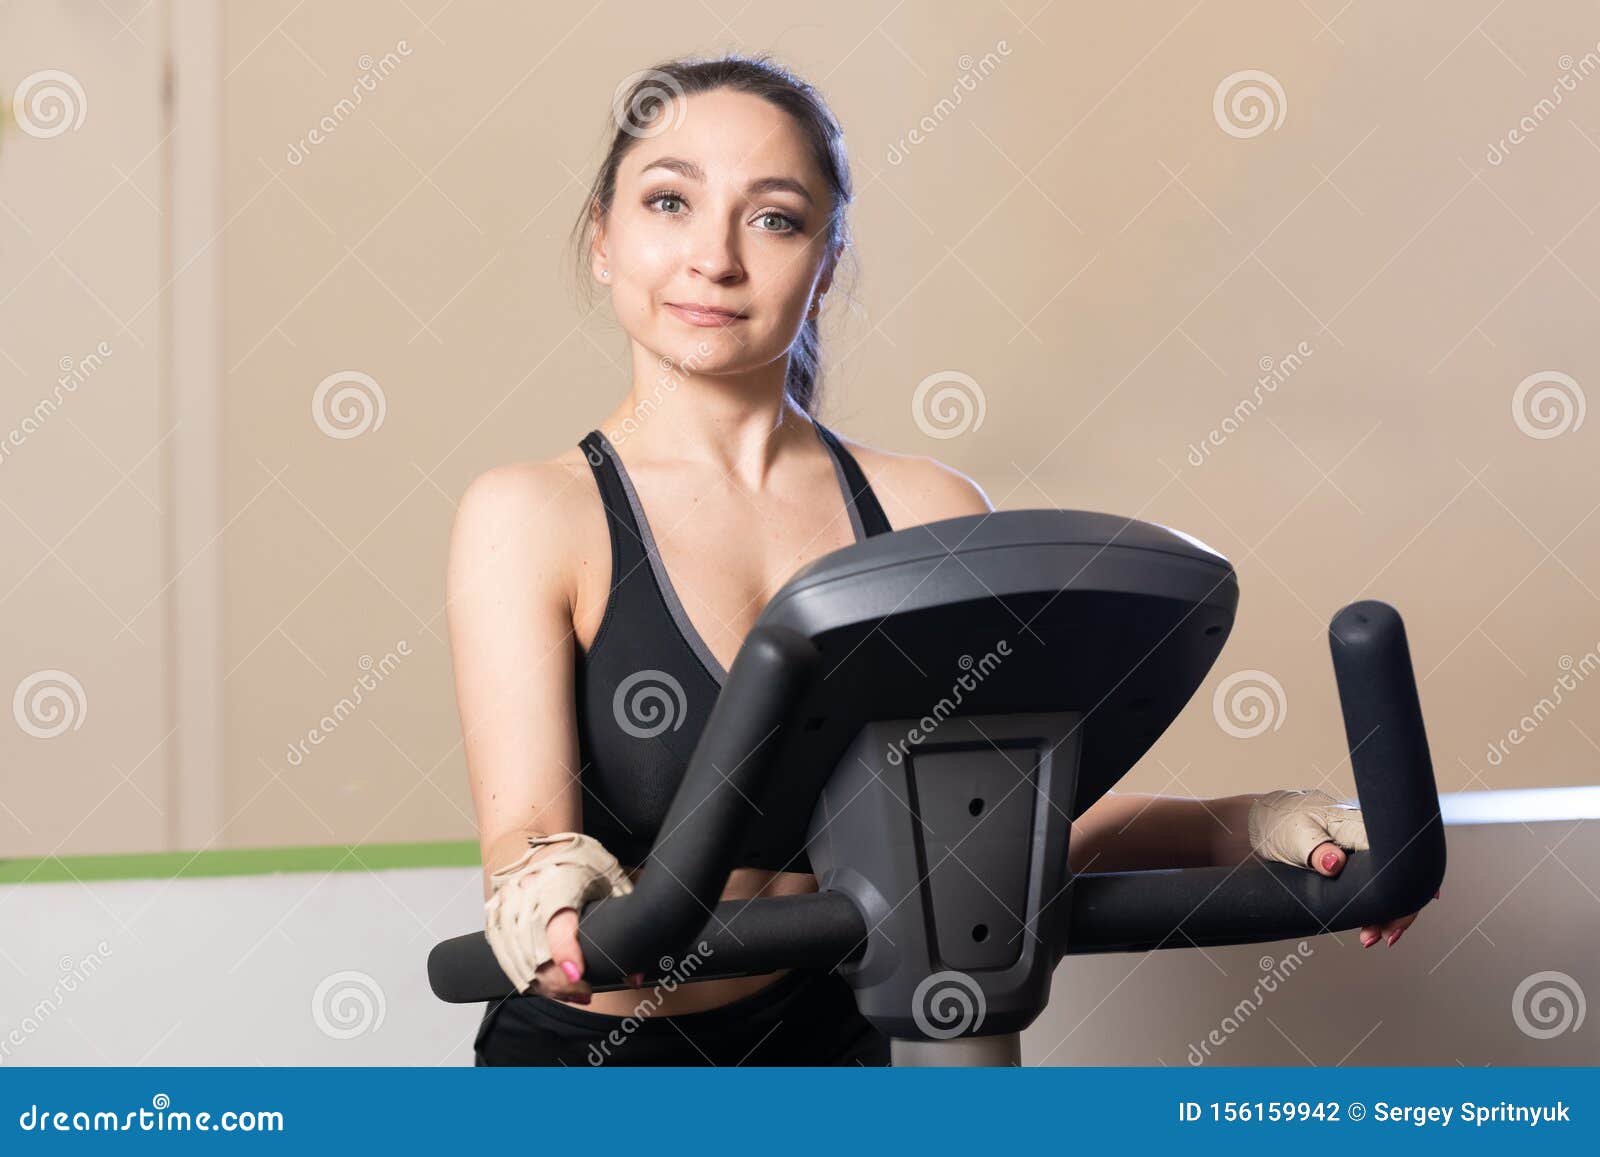 Young Attractive Girl At Gym On Exercise Bike, Fitness And 